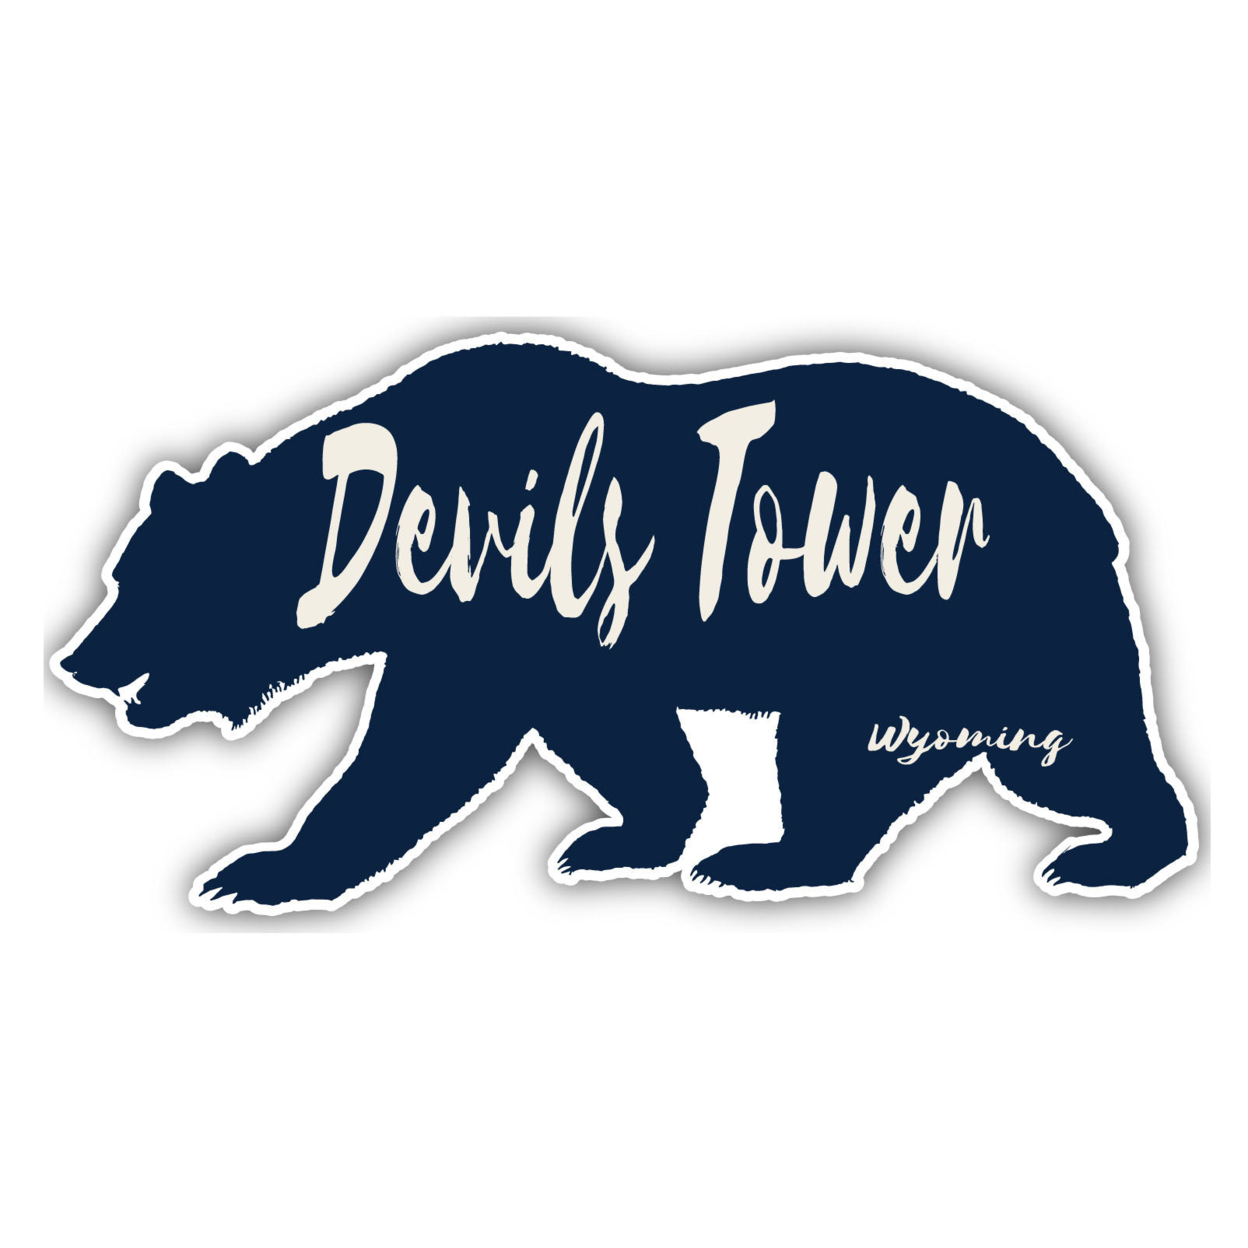 Devils Tower Wyoming Souvenir Decorative Stickers (Choose Theme And Size) - Single Unit, 2-Inch, Adventures Awaits